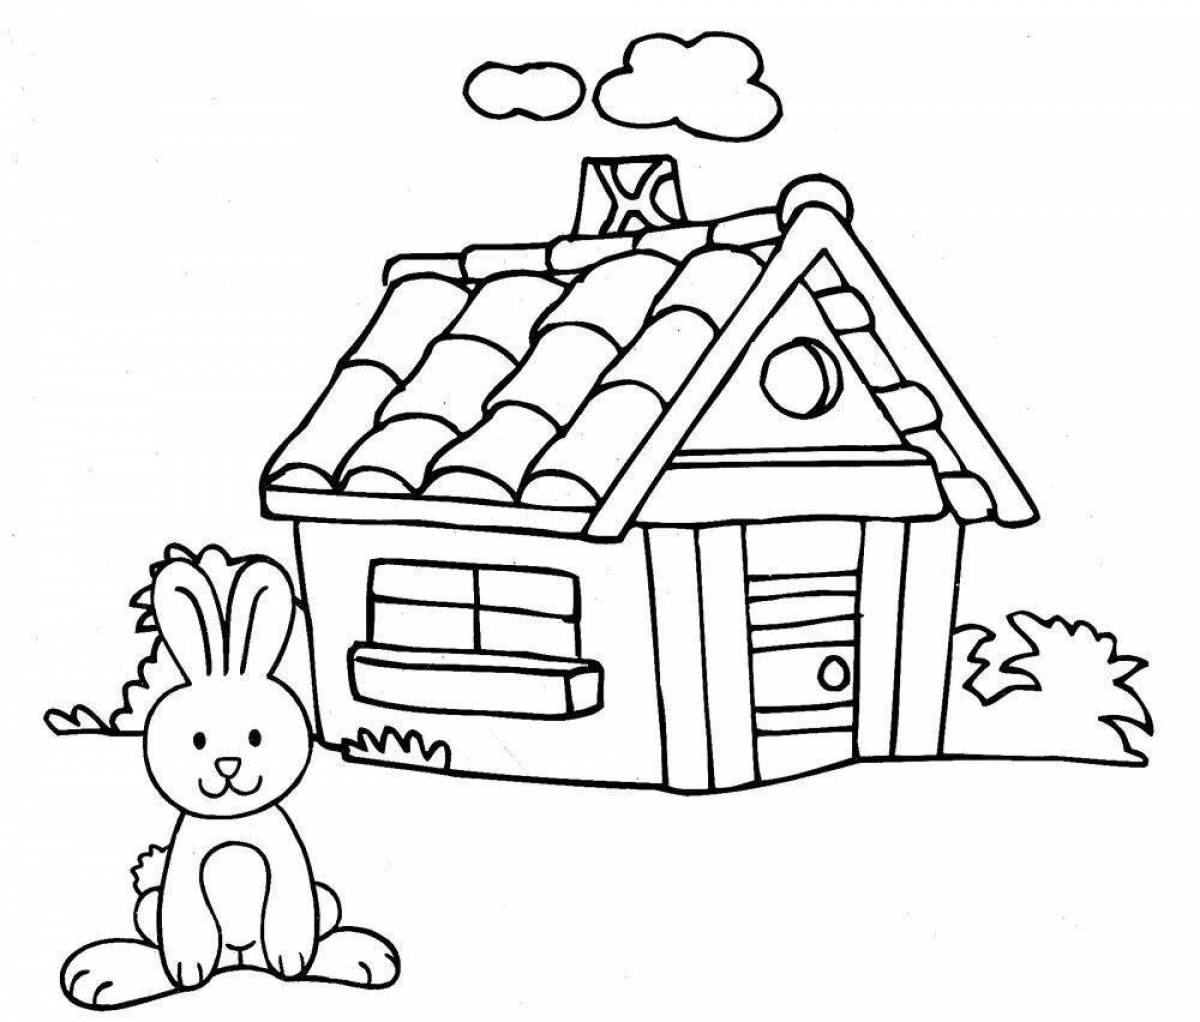 Attractive house coloring pages for 4-5 year olds